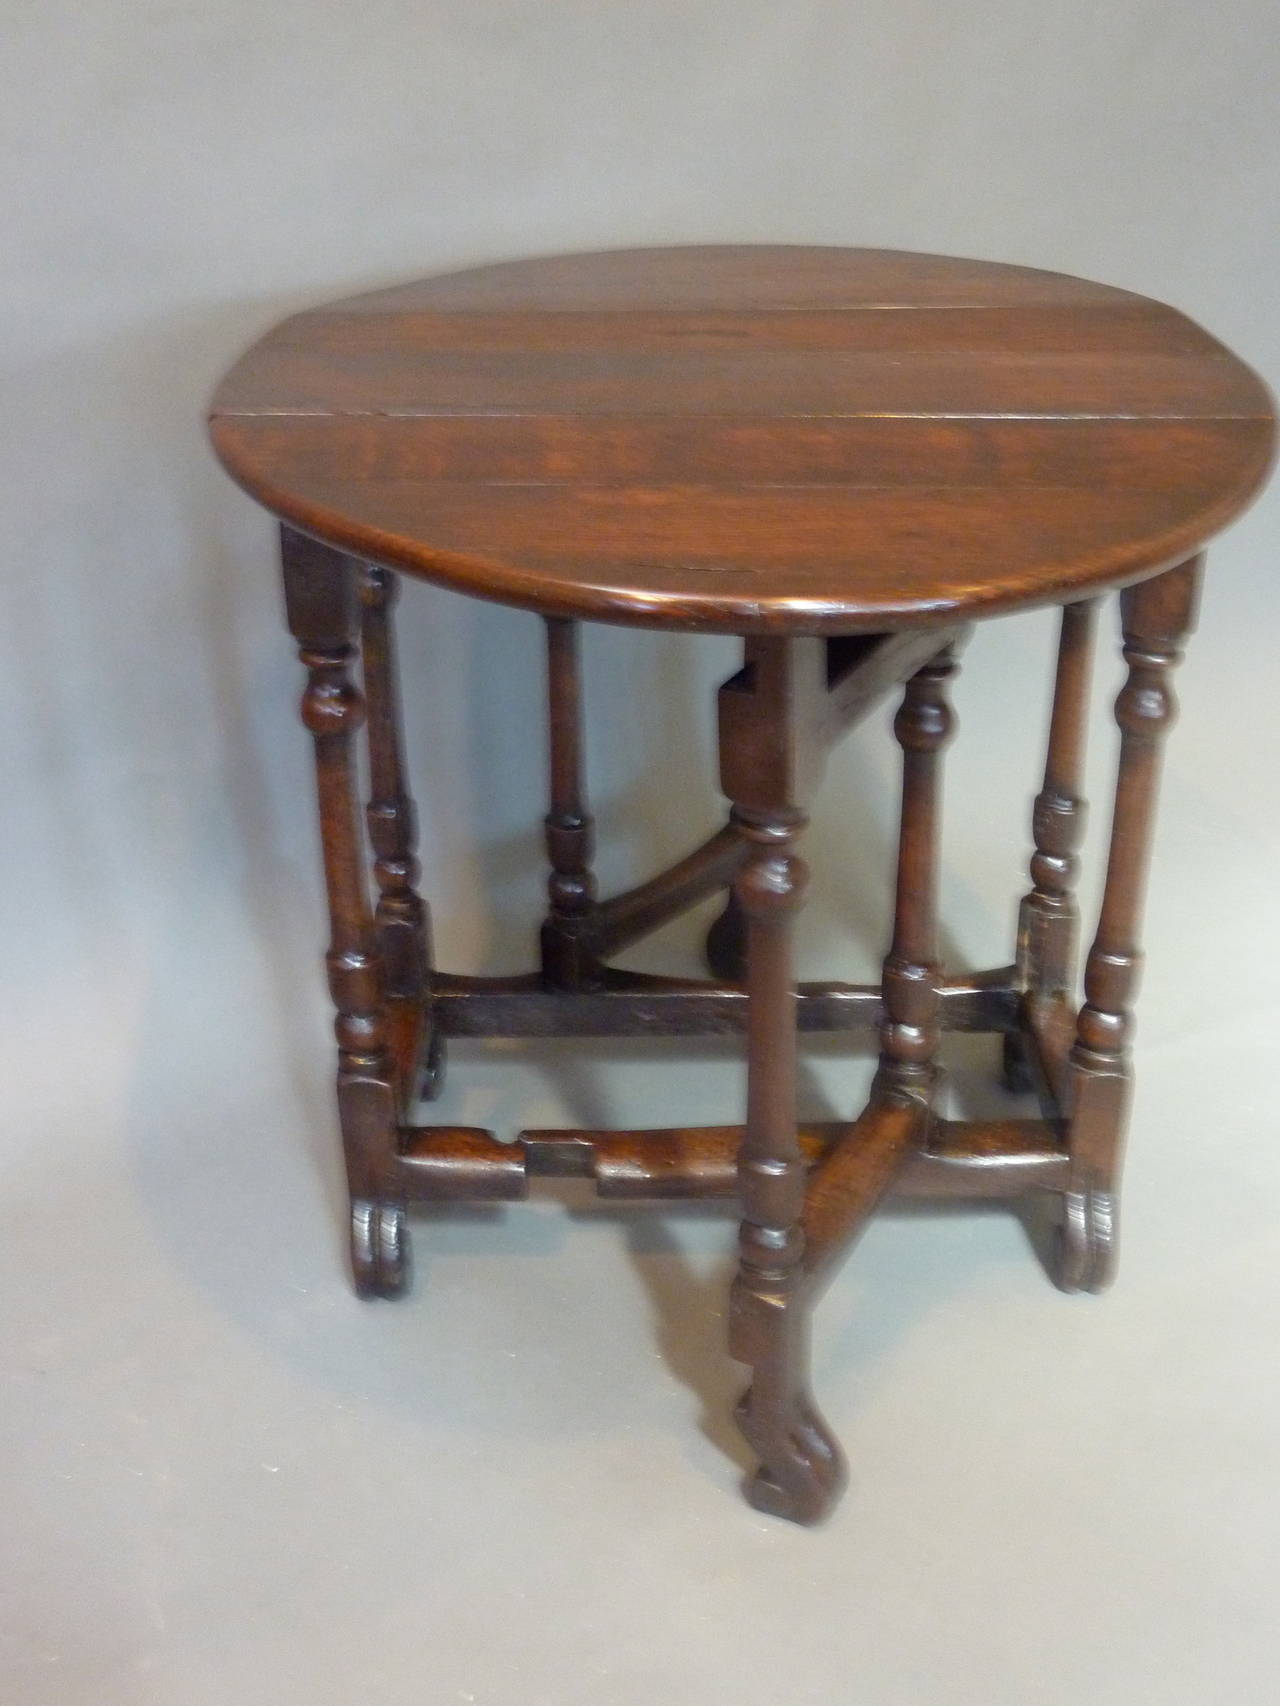 18th Century and Earlier A Small Charles II Period 17th Century Gateleg Table.